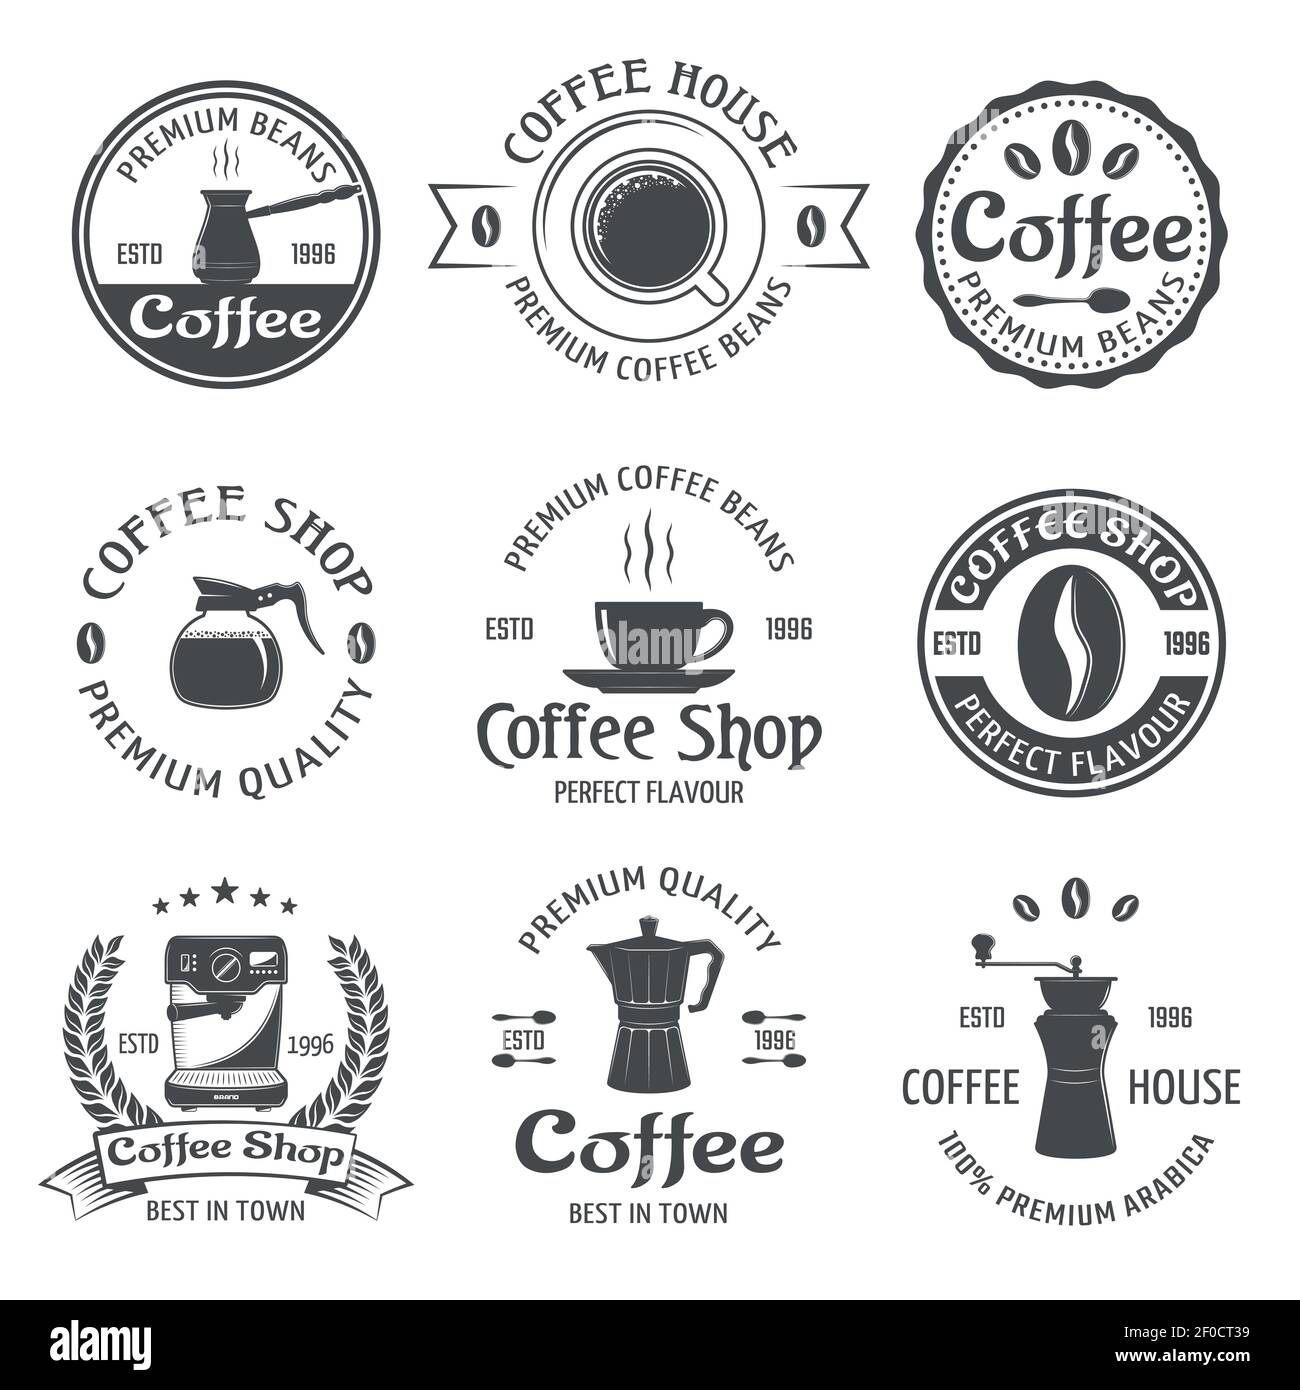 Coffee emblem set with premium beams coffee house and coffee shop descriptions vector illustration Stock Vector